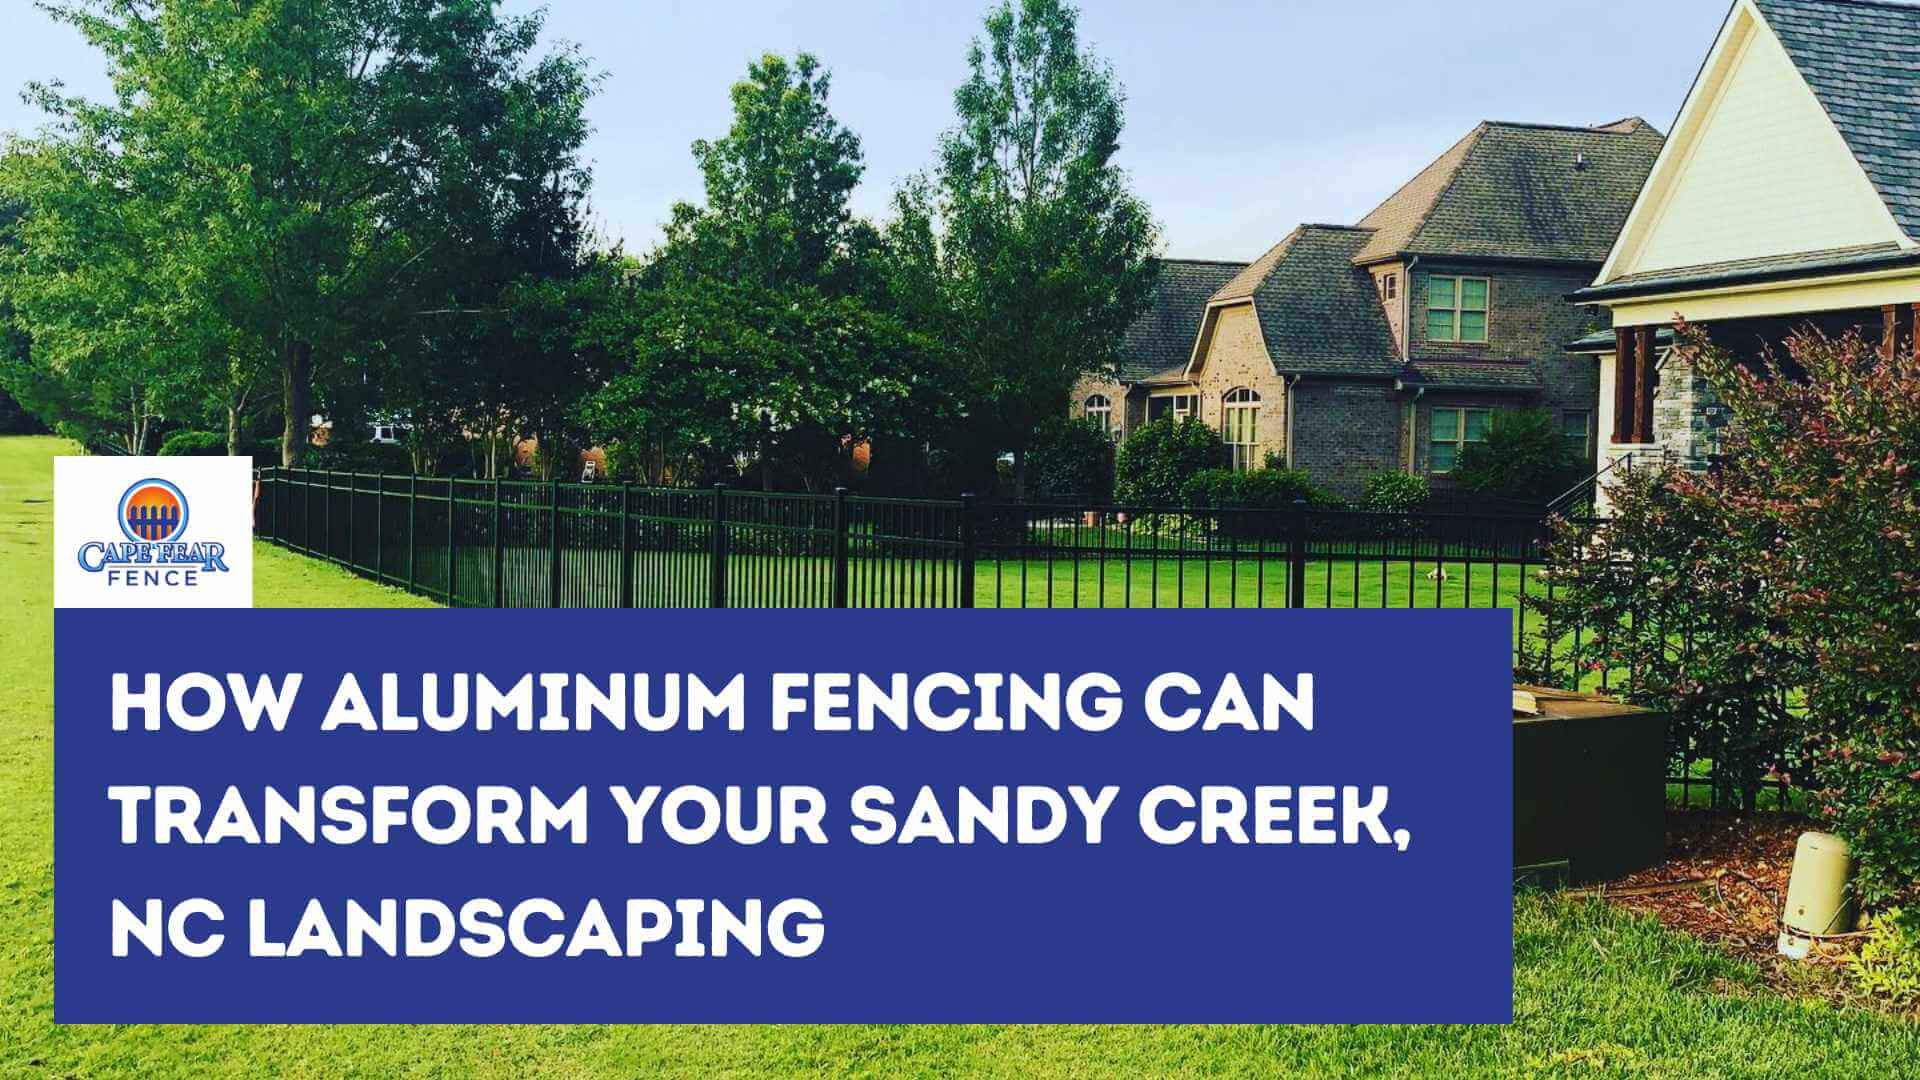 How Aluminum Fencing Can Transform Your Sandy Creek, NC Landscaping